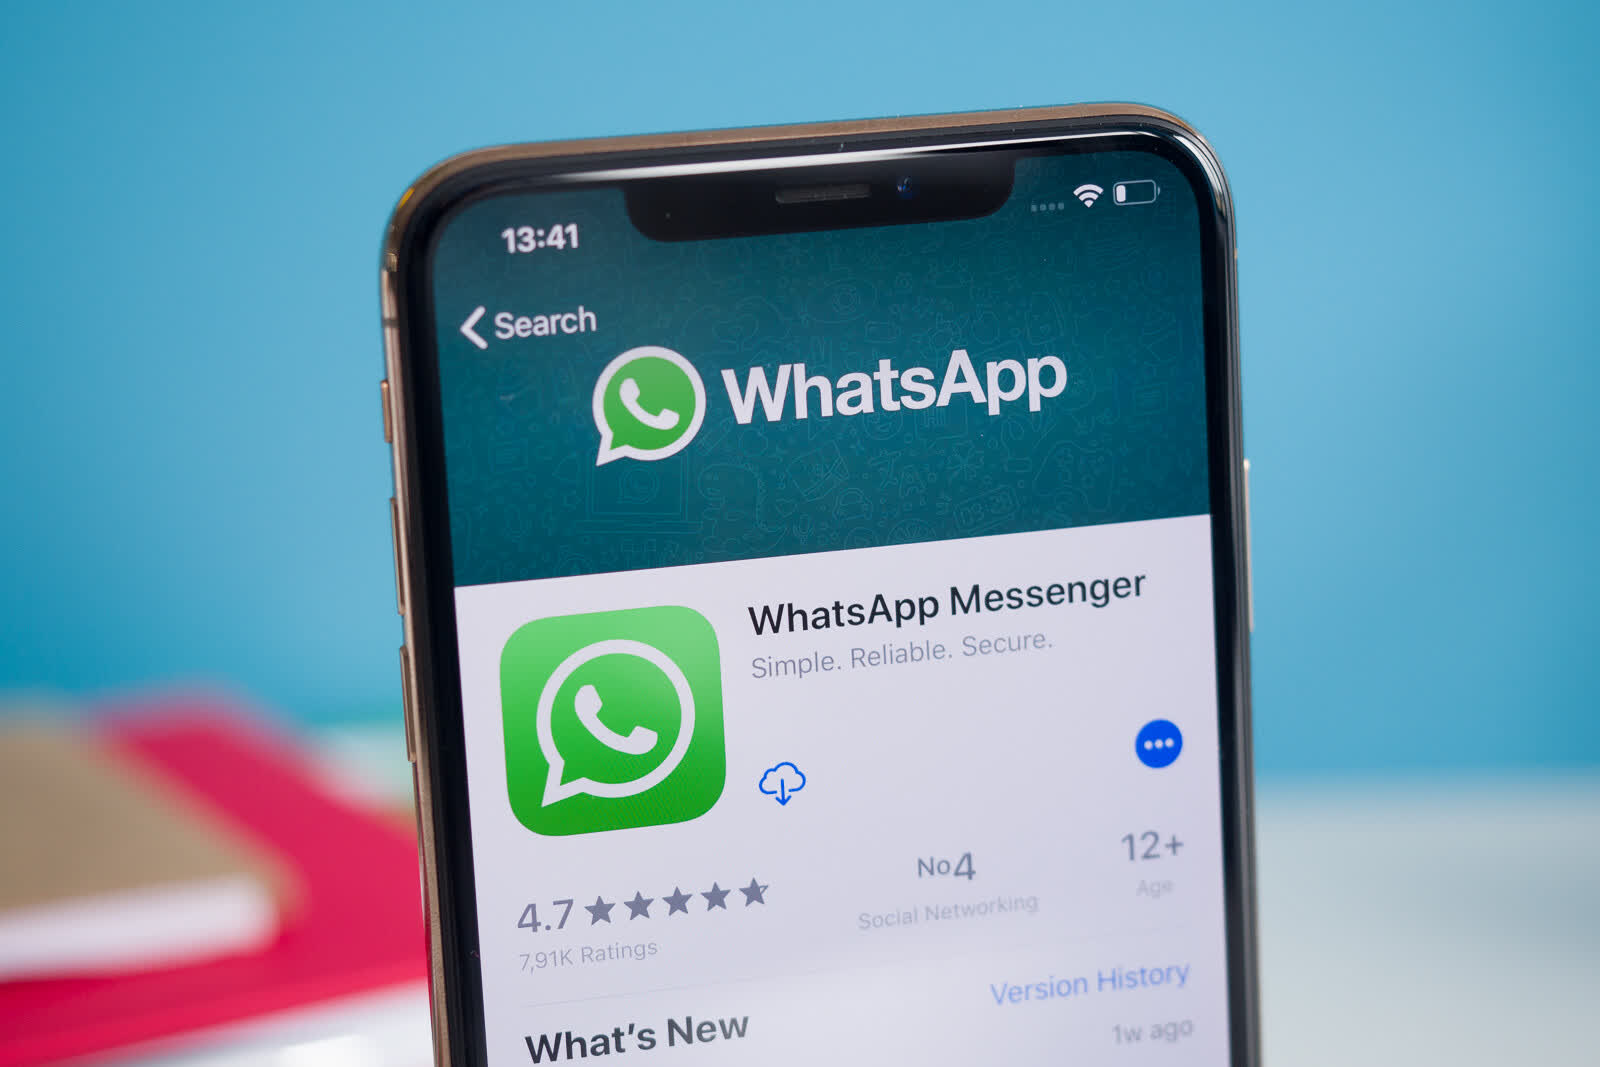 You can move your WhatsApp data from Android to iPhone now